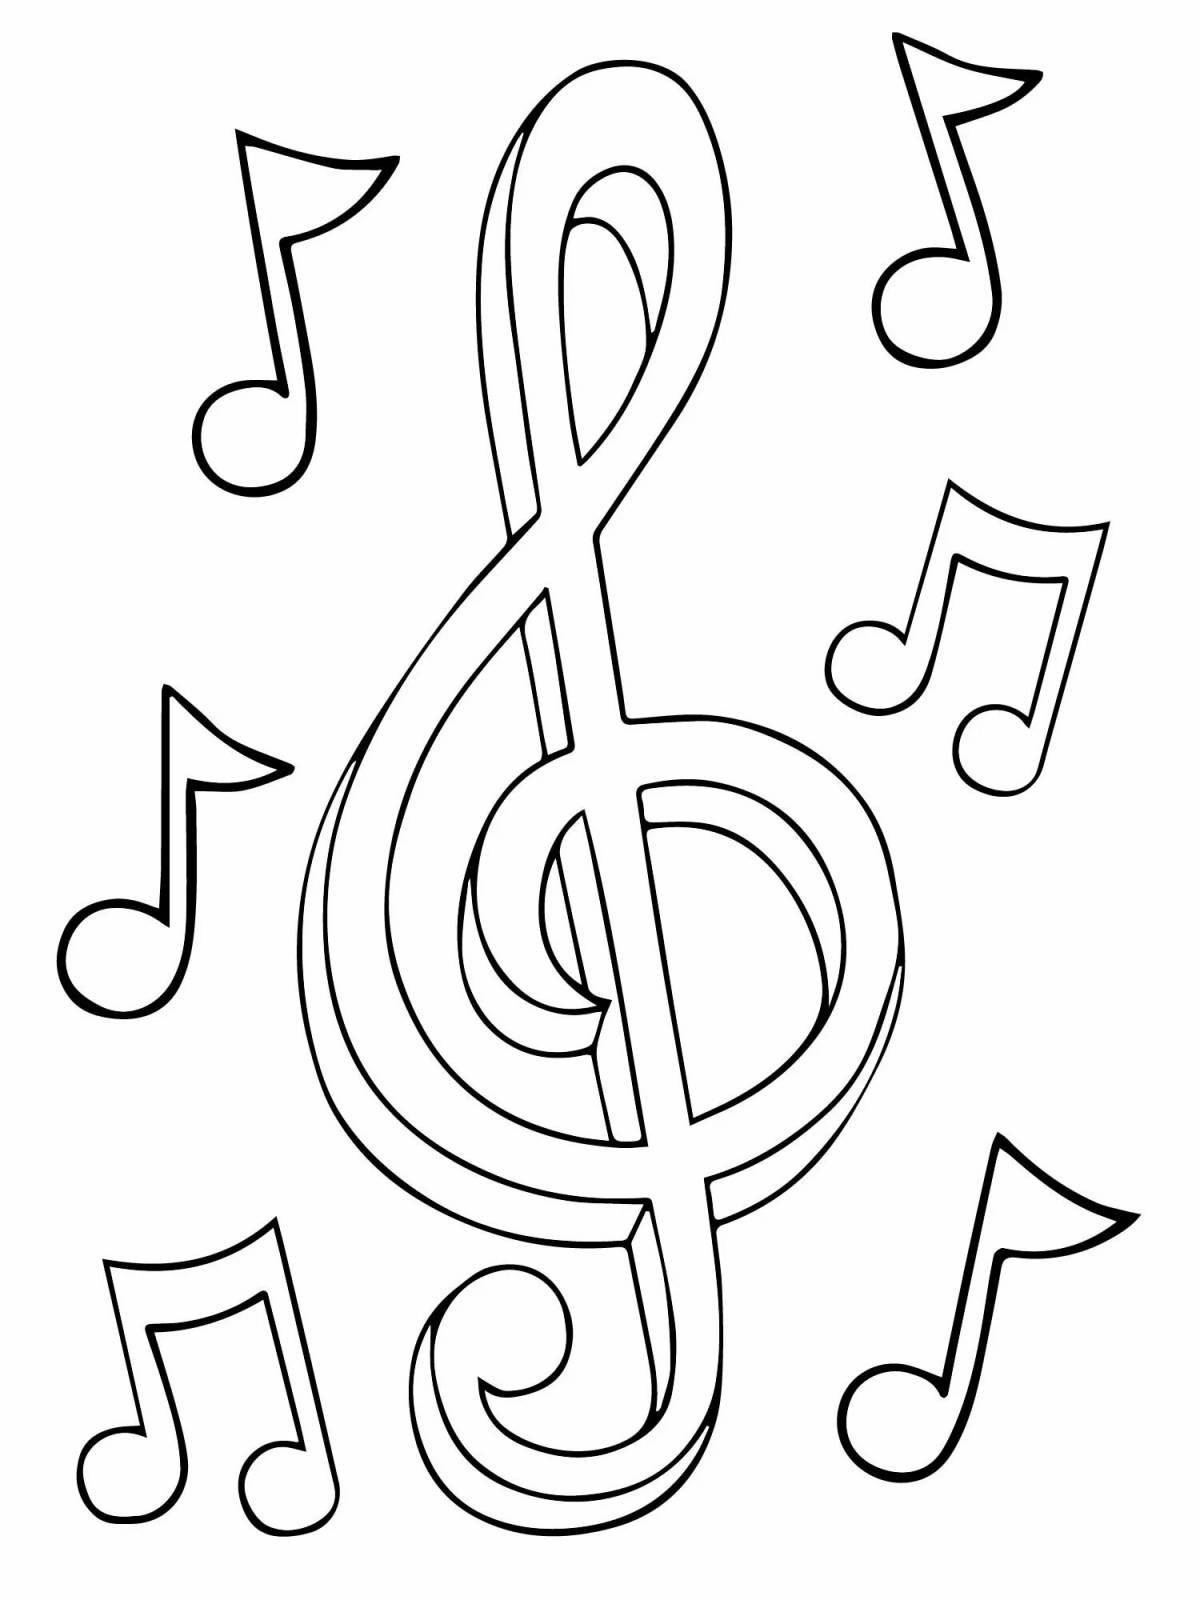 Bright music coloring book for music education